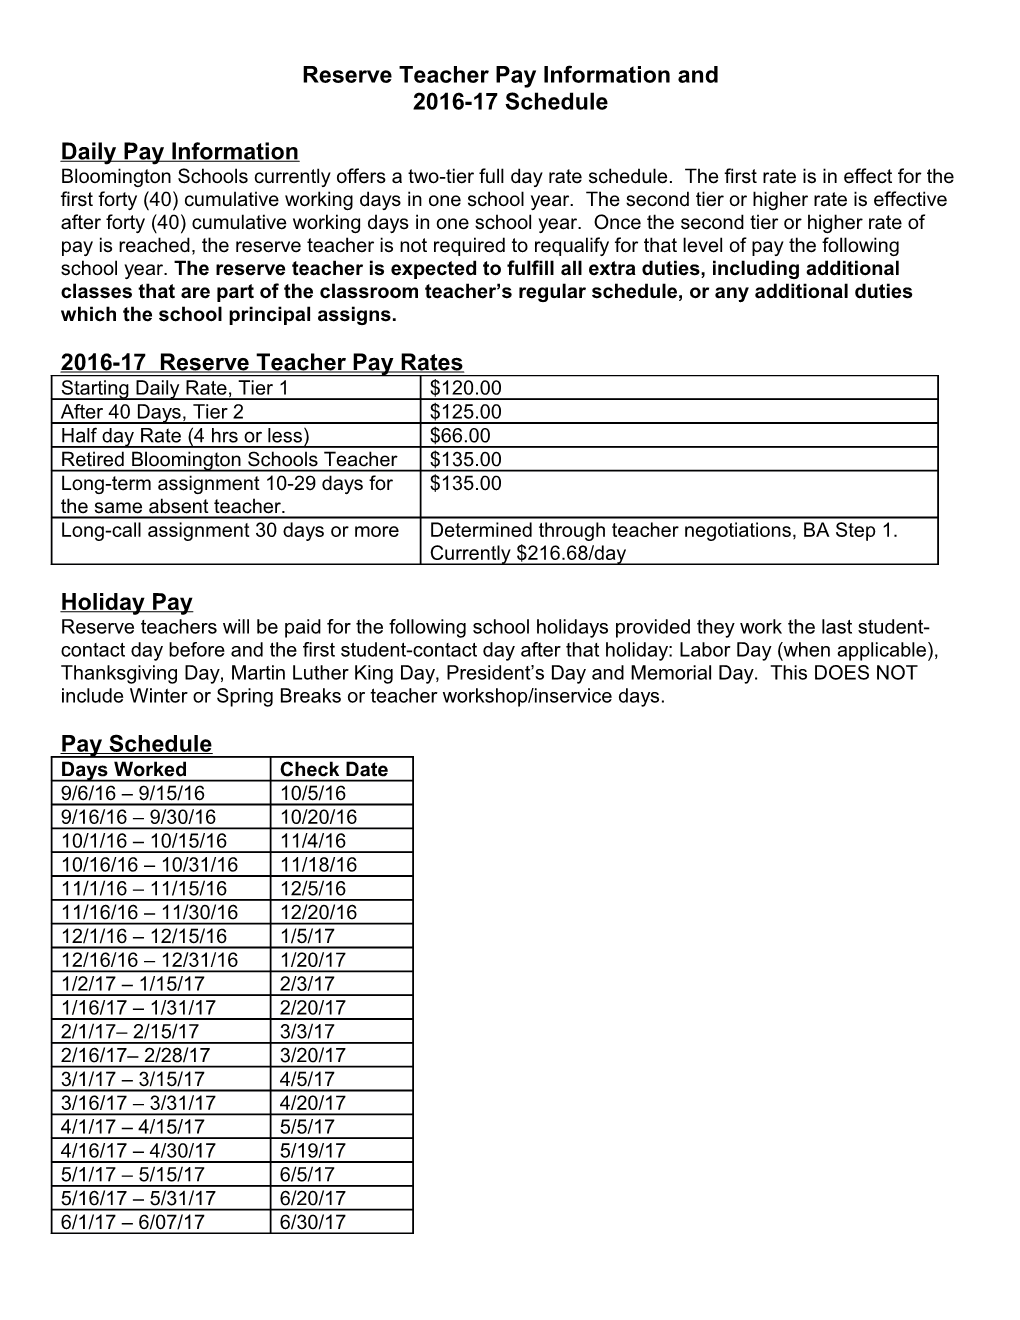 Reserve Teacher Pay Information And